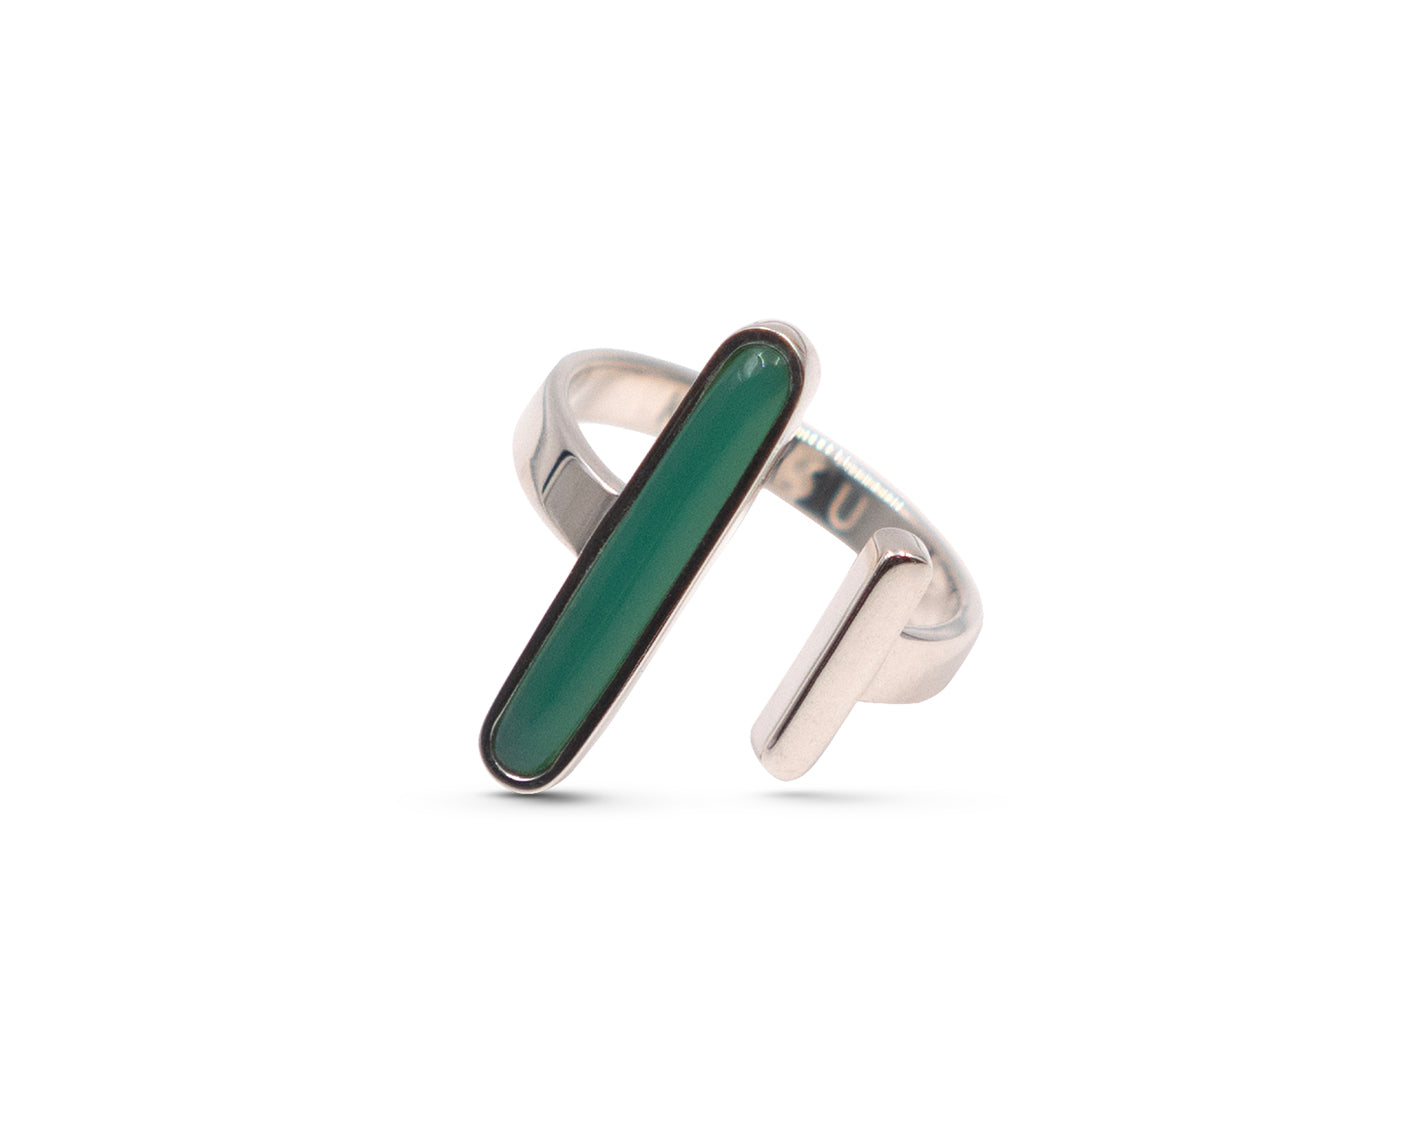 Open Ring Silver with Chrysoprase Agate